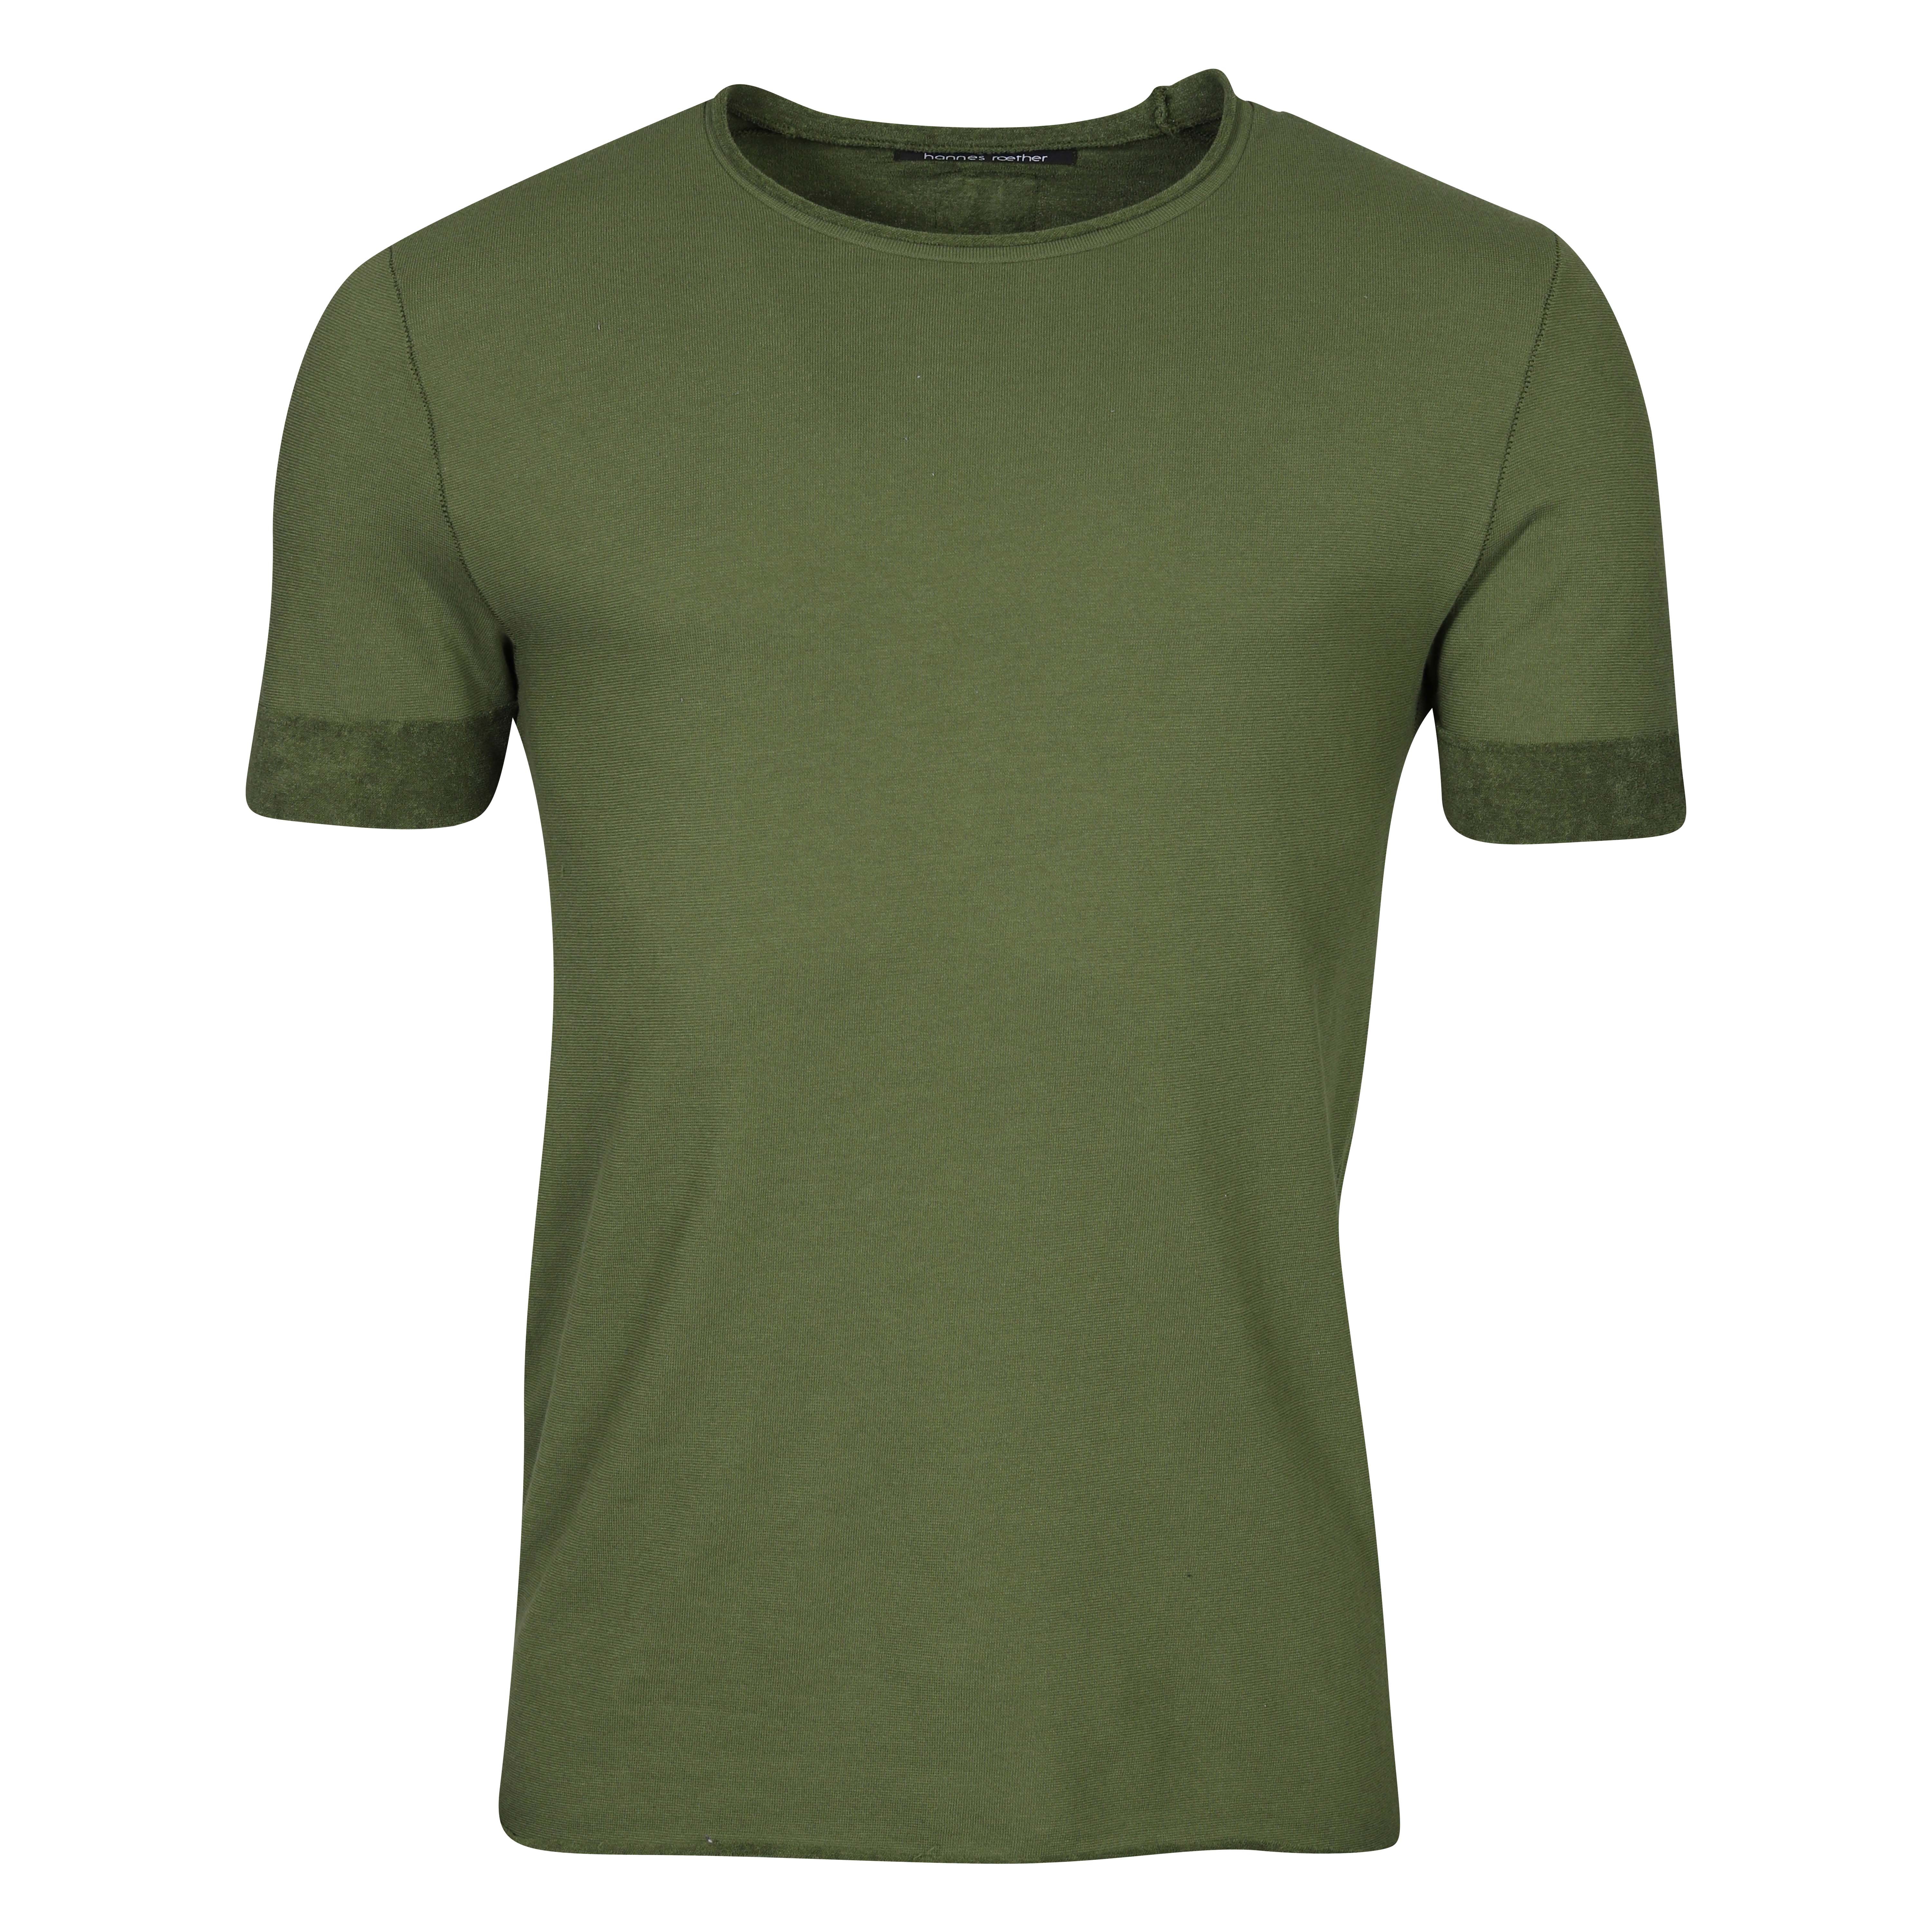 Hannes Roether Frottee T-Shirt in Pesto